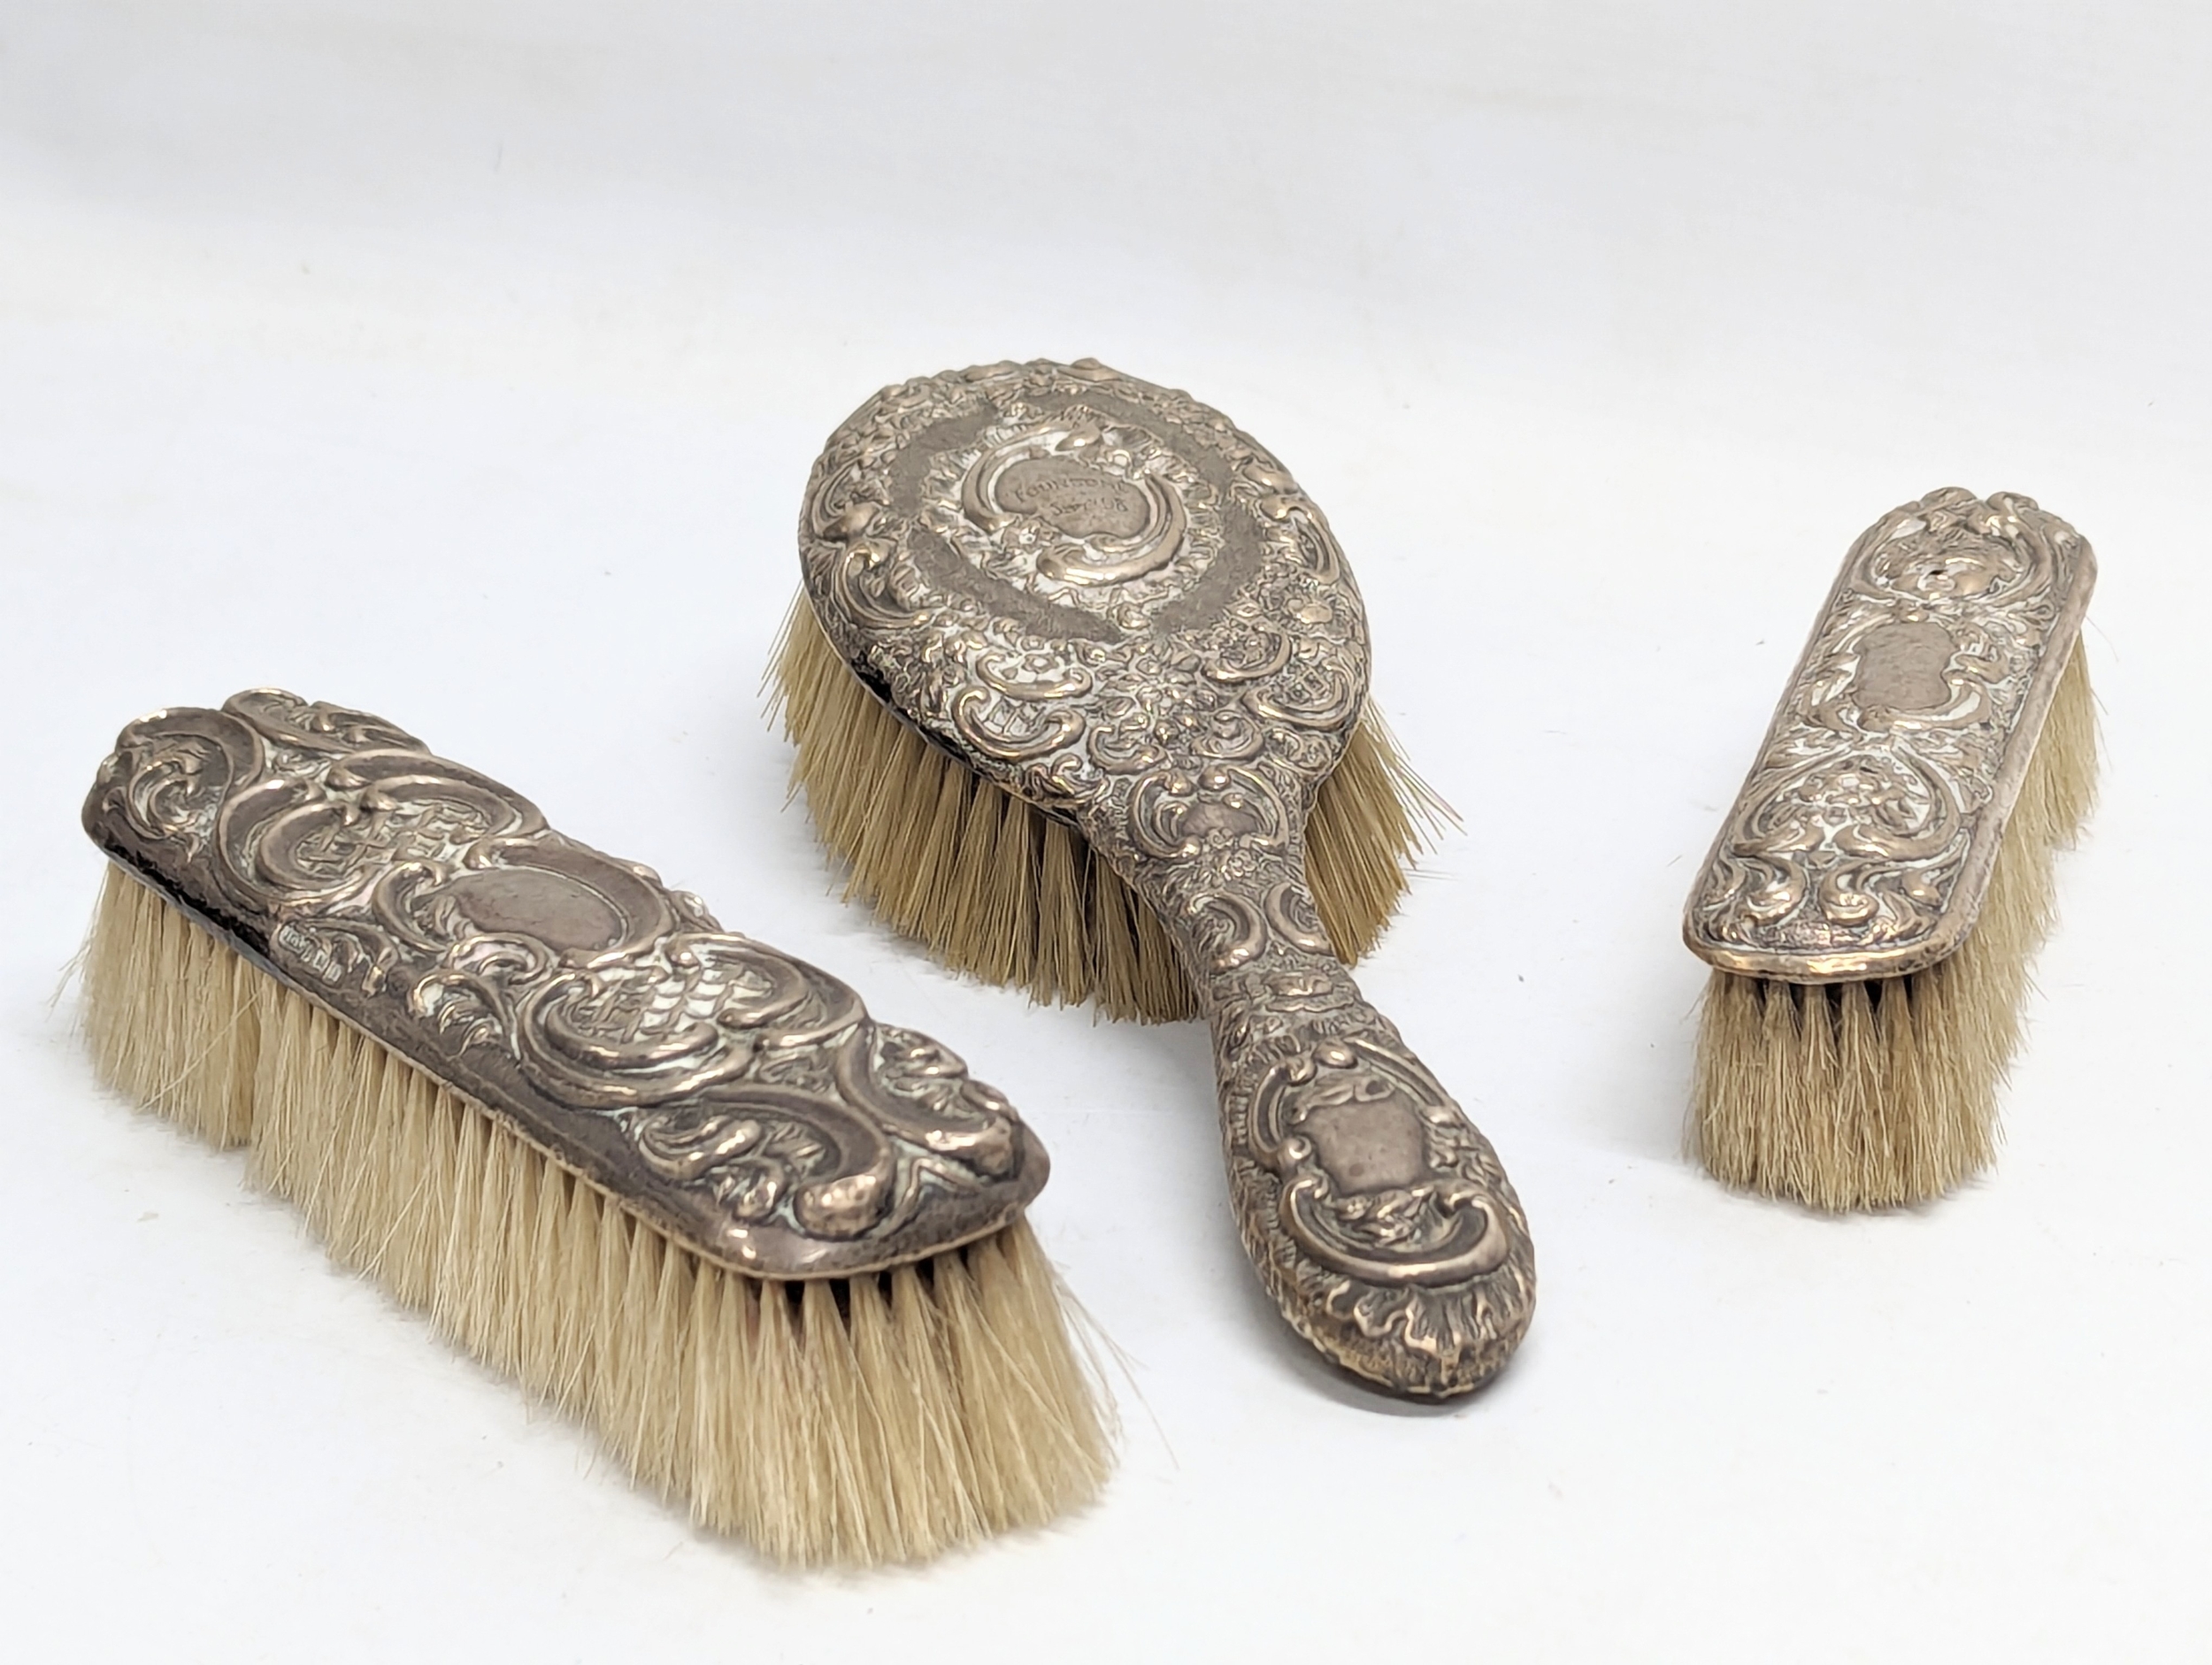 3 late 19th / early 20th century silver vanity brushes. William Aitken, Chester, 1900. George Nathan